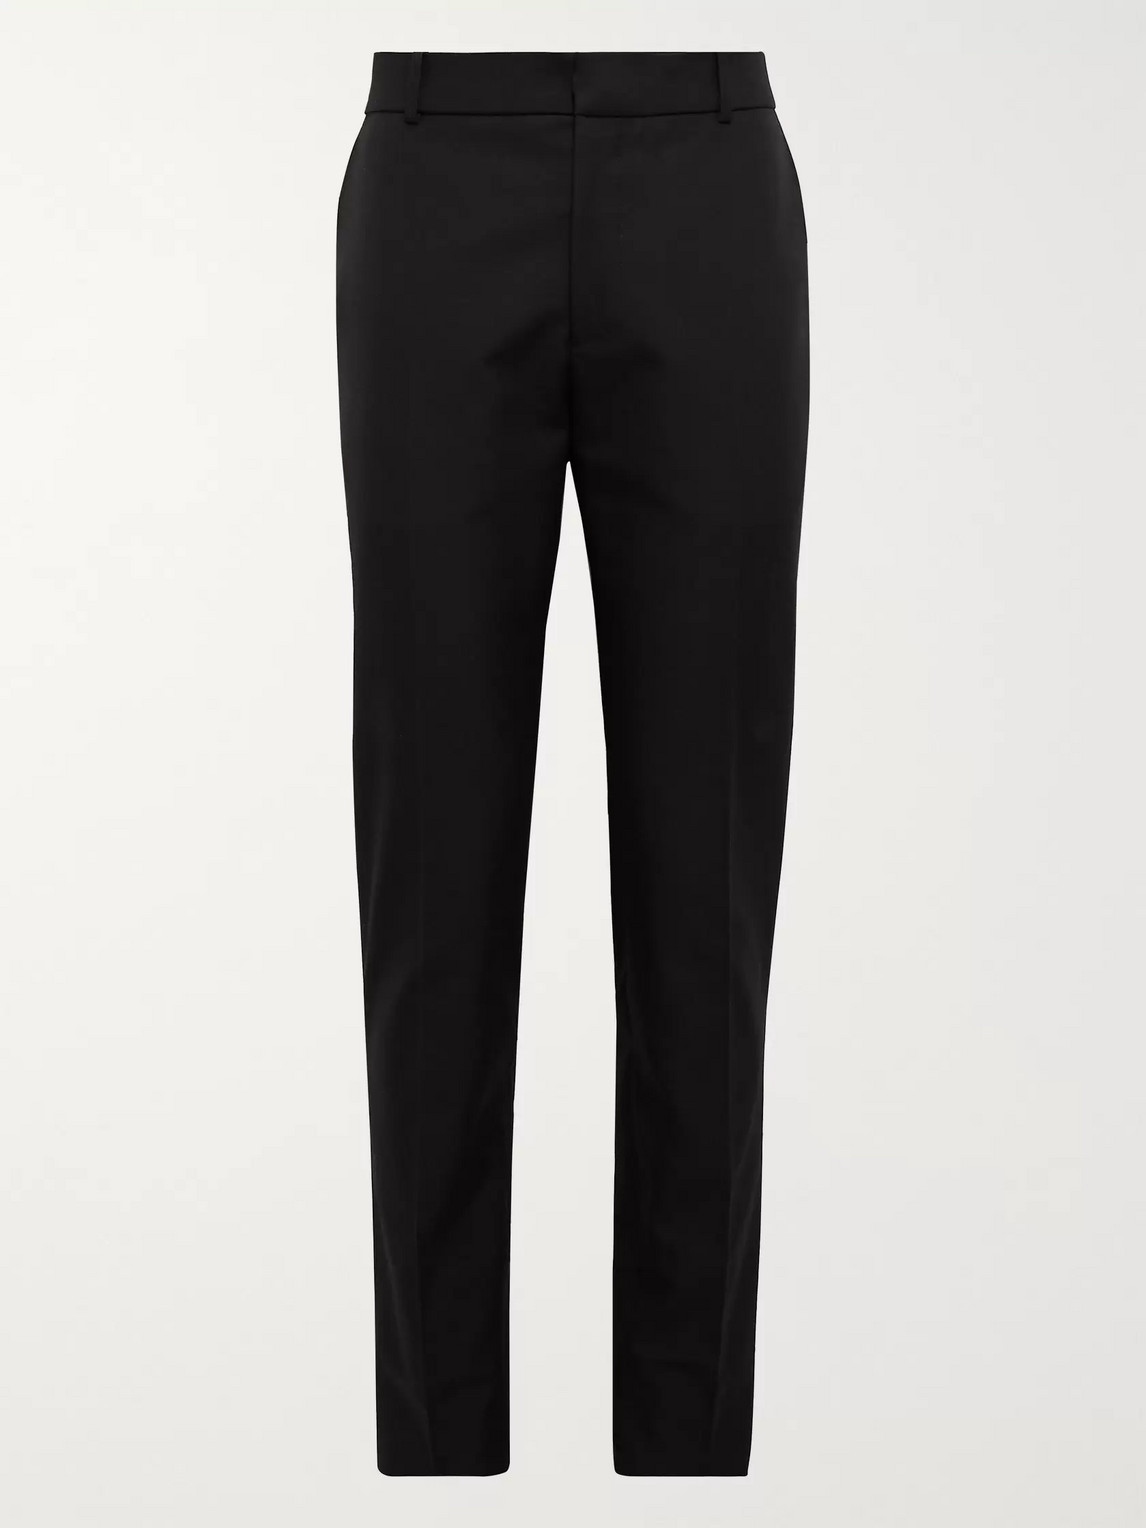 ALEXANDER MCQUEEN SLIM-FIT LOGO-EMBROIDERED PANAMA COTTON TROUSERS